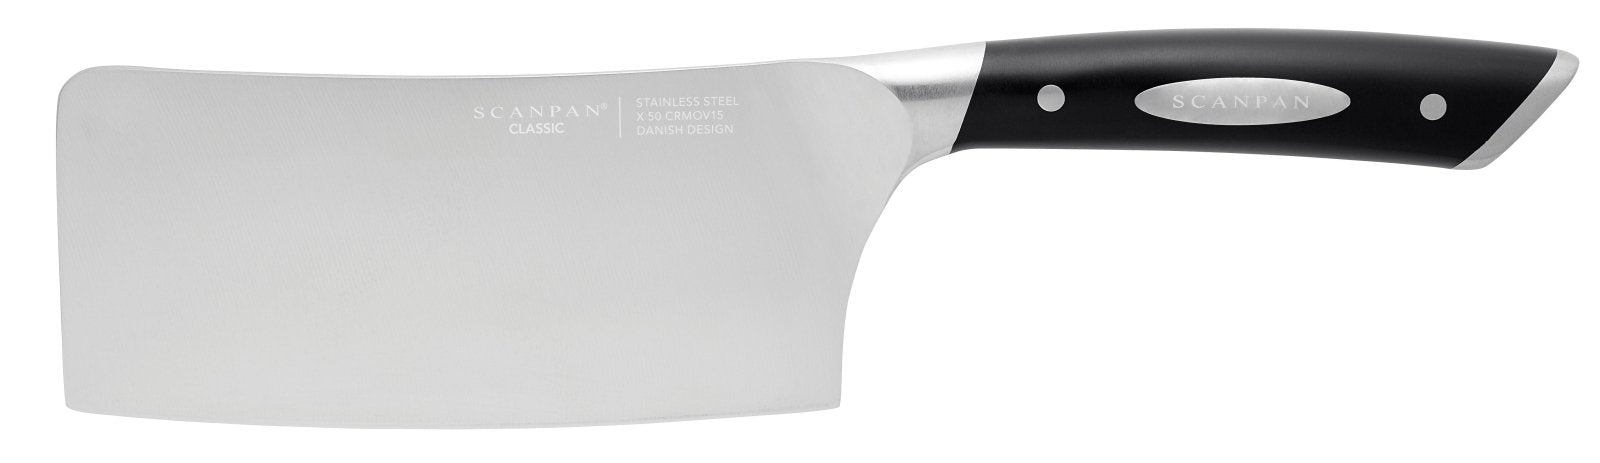 Scanpan Classic 15cm Cleaver - SP92311500 - The Cotswold Knife Company